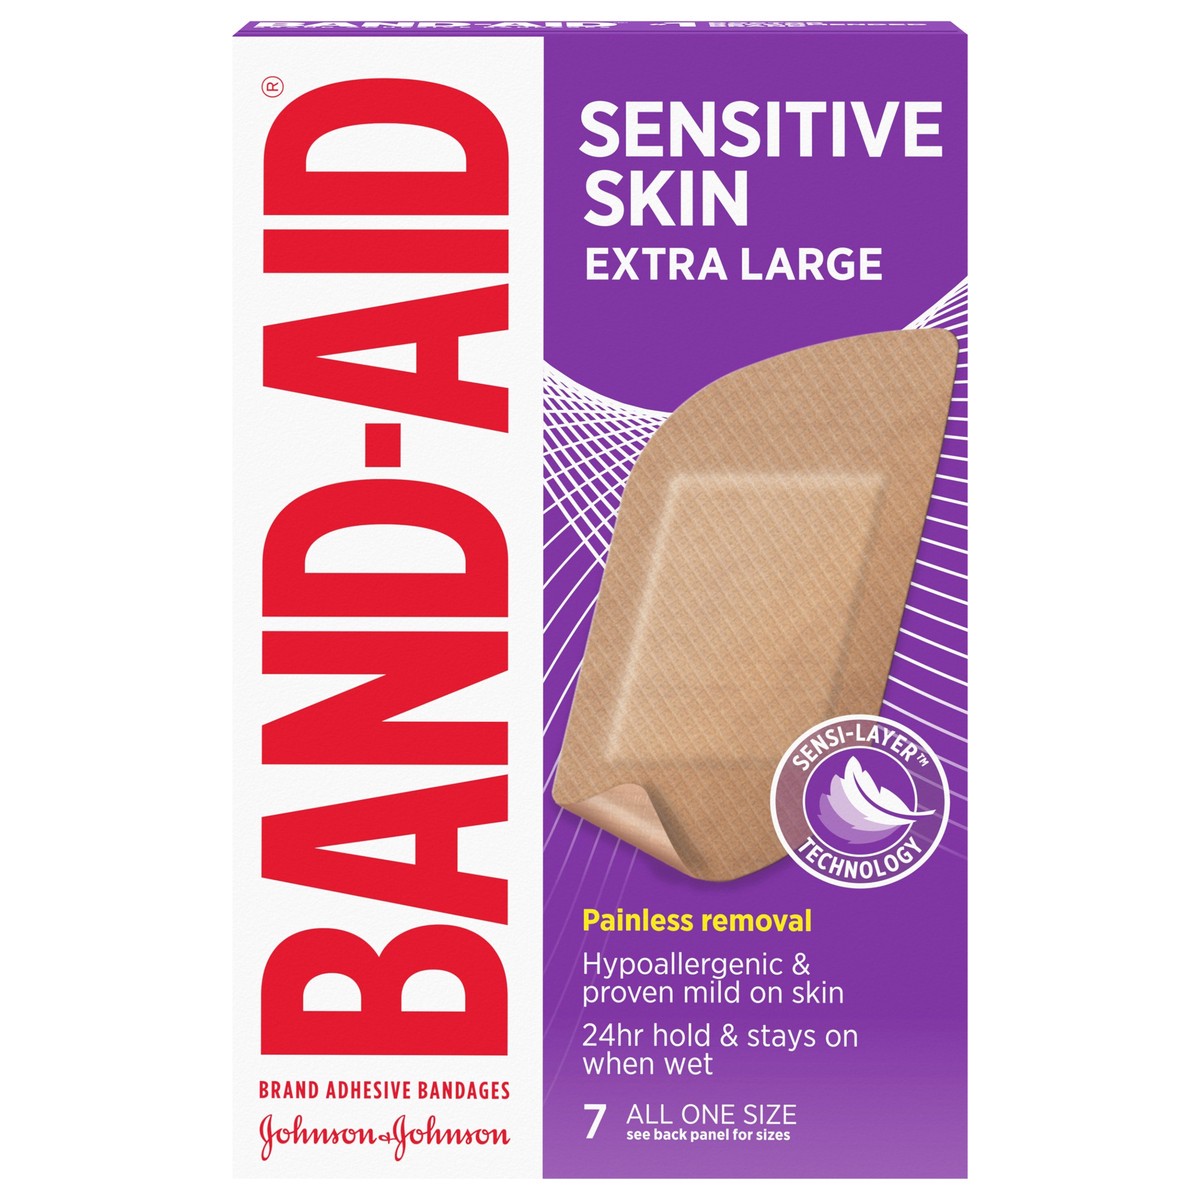 slide 1 of 8, BAND-AID Adhesive Bandages for Sensitive Skin, Hypoallergenic Bandages with Painless Removal, Stays on When Wet and Suitable for Eczema Prone Skin, Sterile, Extra Large Size, 7 ct, 7 ct